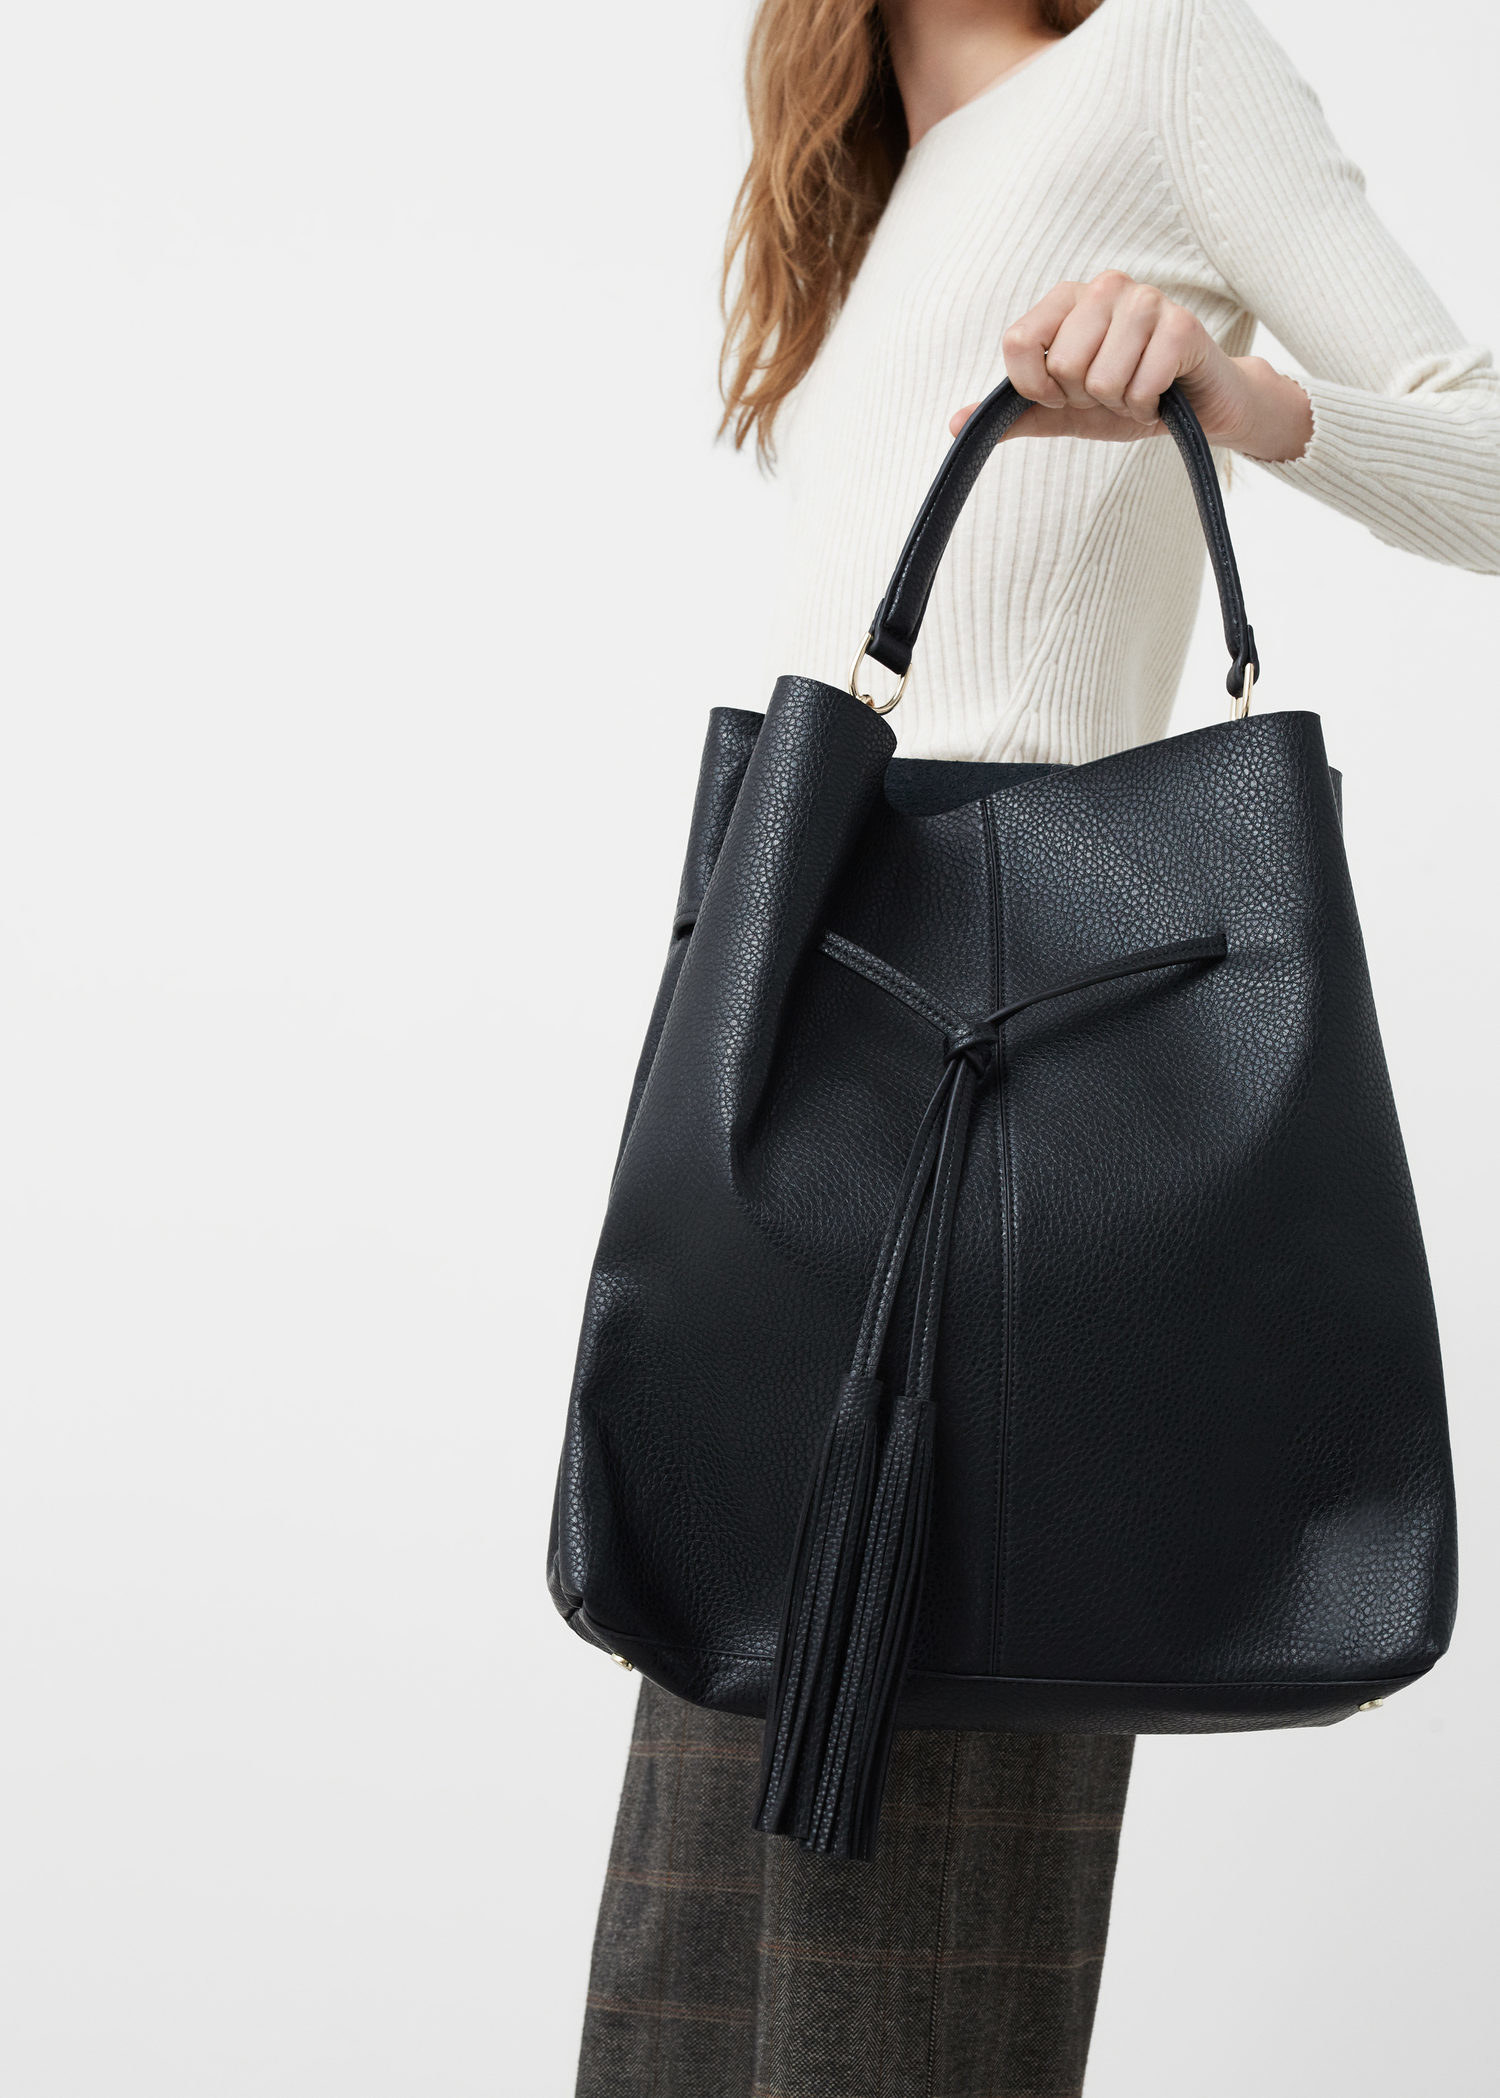 44 Bags You Can Fit Your Entire Life In